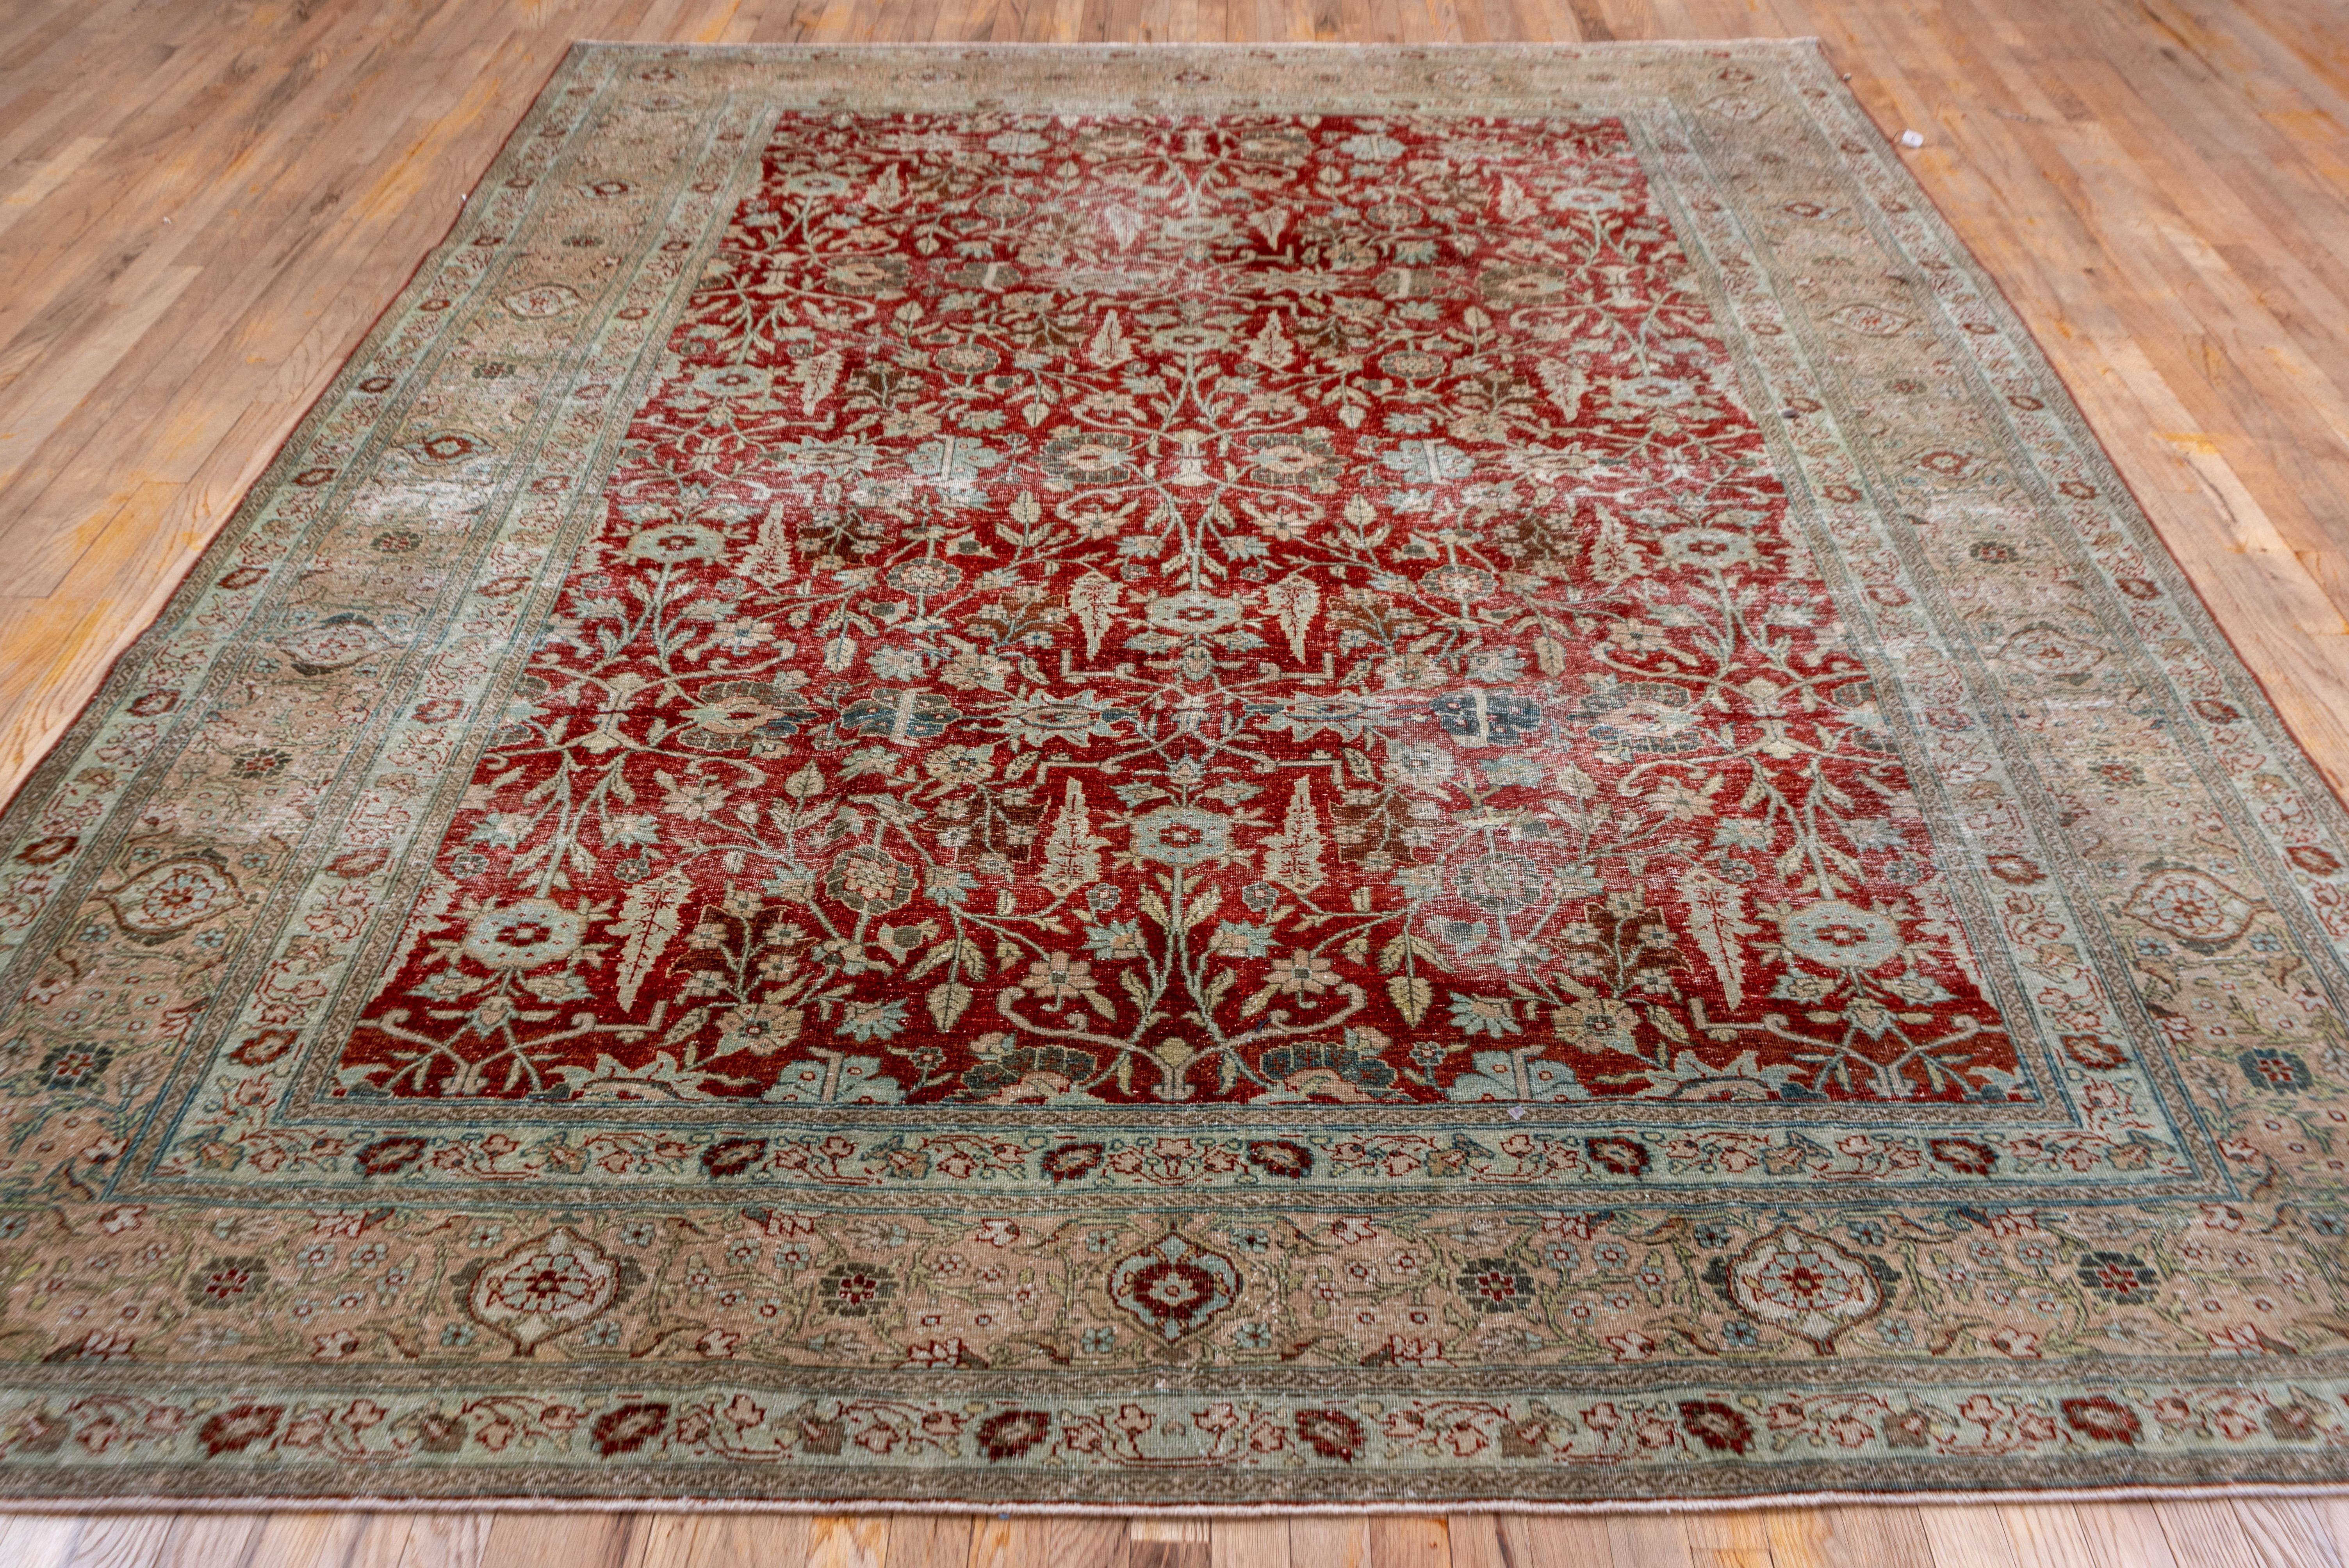 Beautiful Antique Persian Tabriz Rug, Ruby Red Floral Field, Soft Toned Borders In Good Condition For Sale In New York, NY